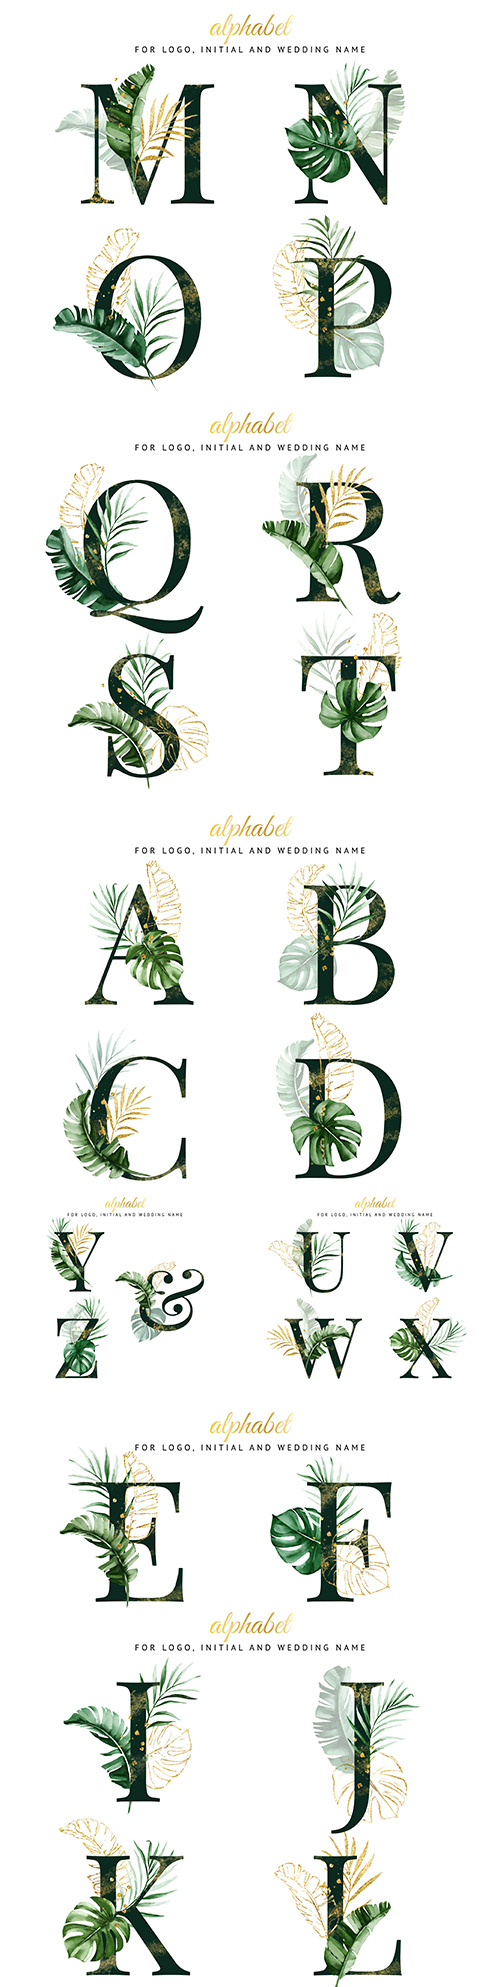 Decorative alphabet with tropical leaves for inviting design
